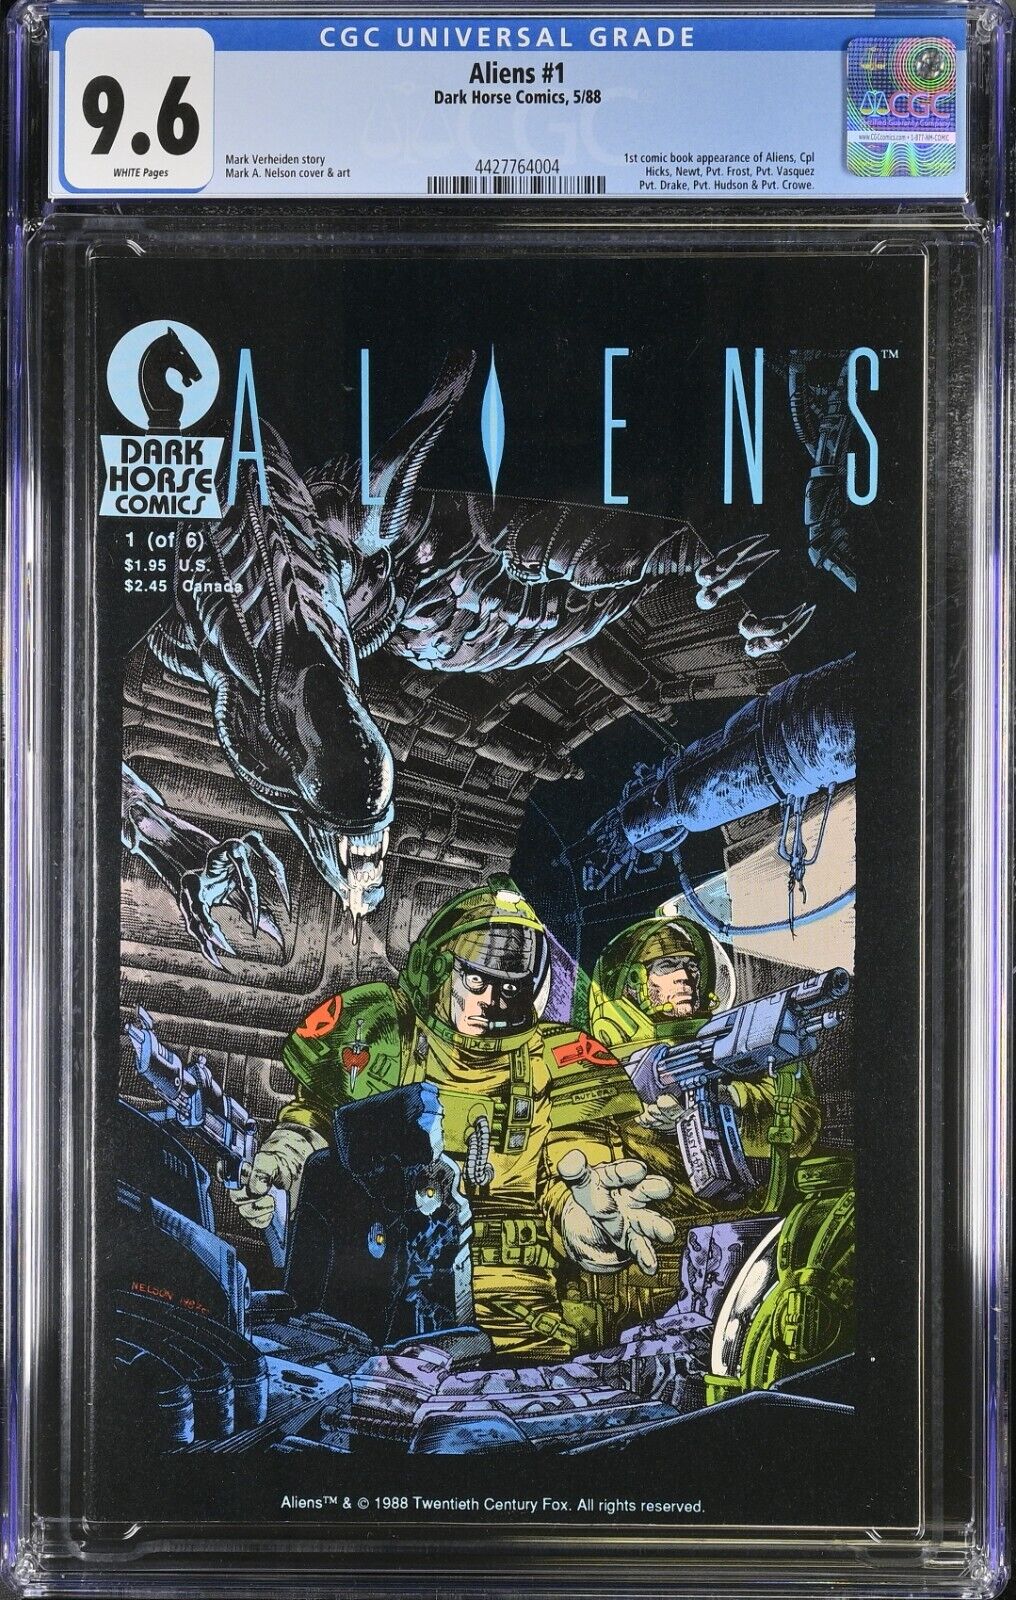 Aliens #1 1988 CGC 9.6 HOT 1st Comic book app of Aliens WHITE PAGES SHIPS FREE